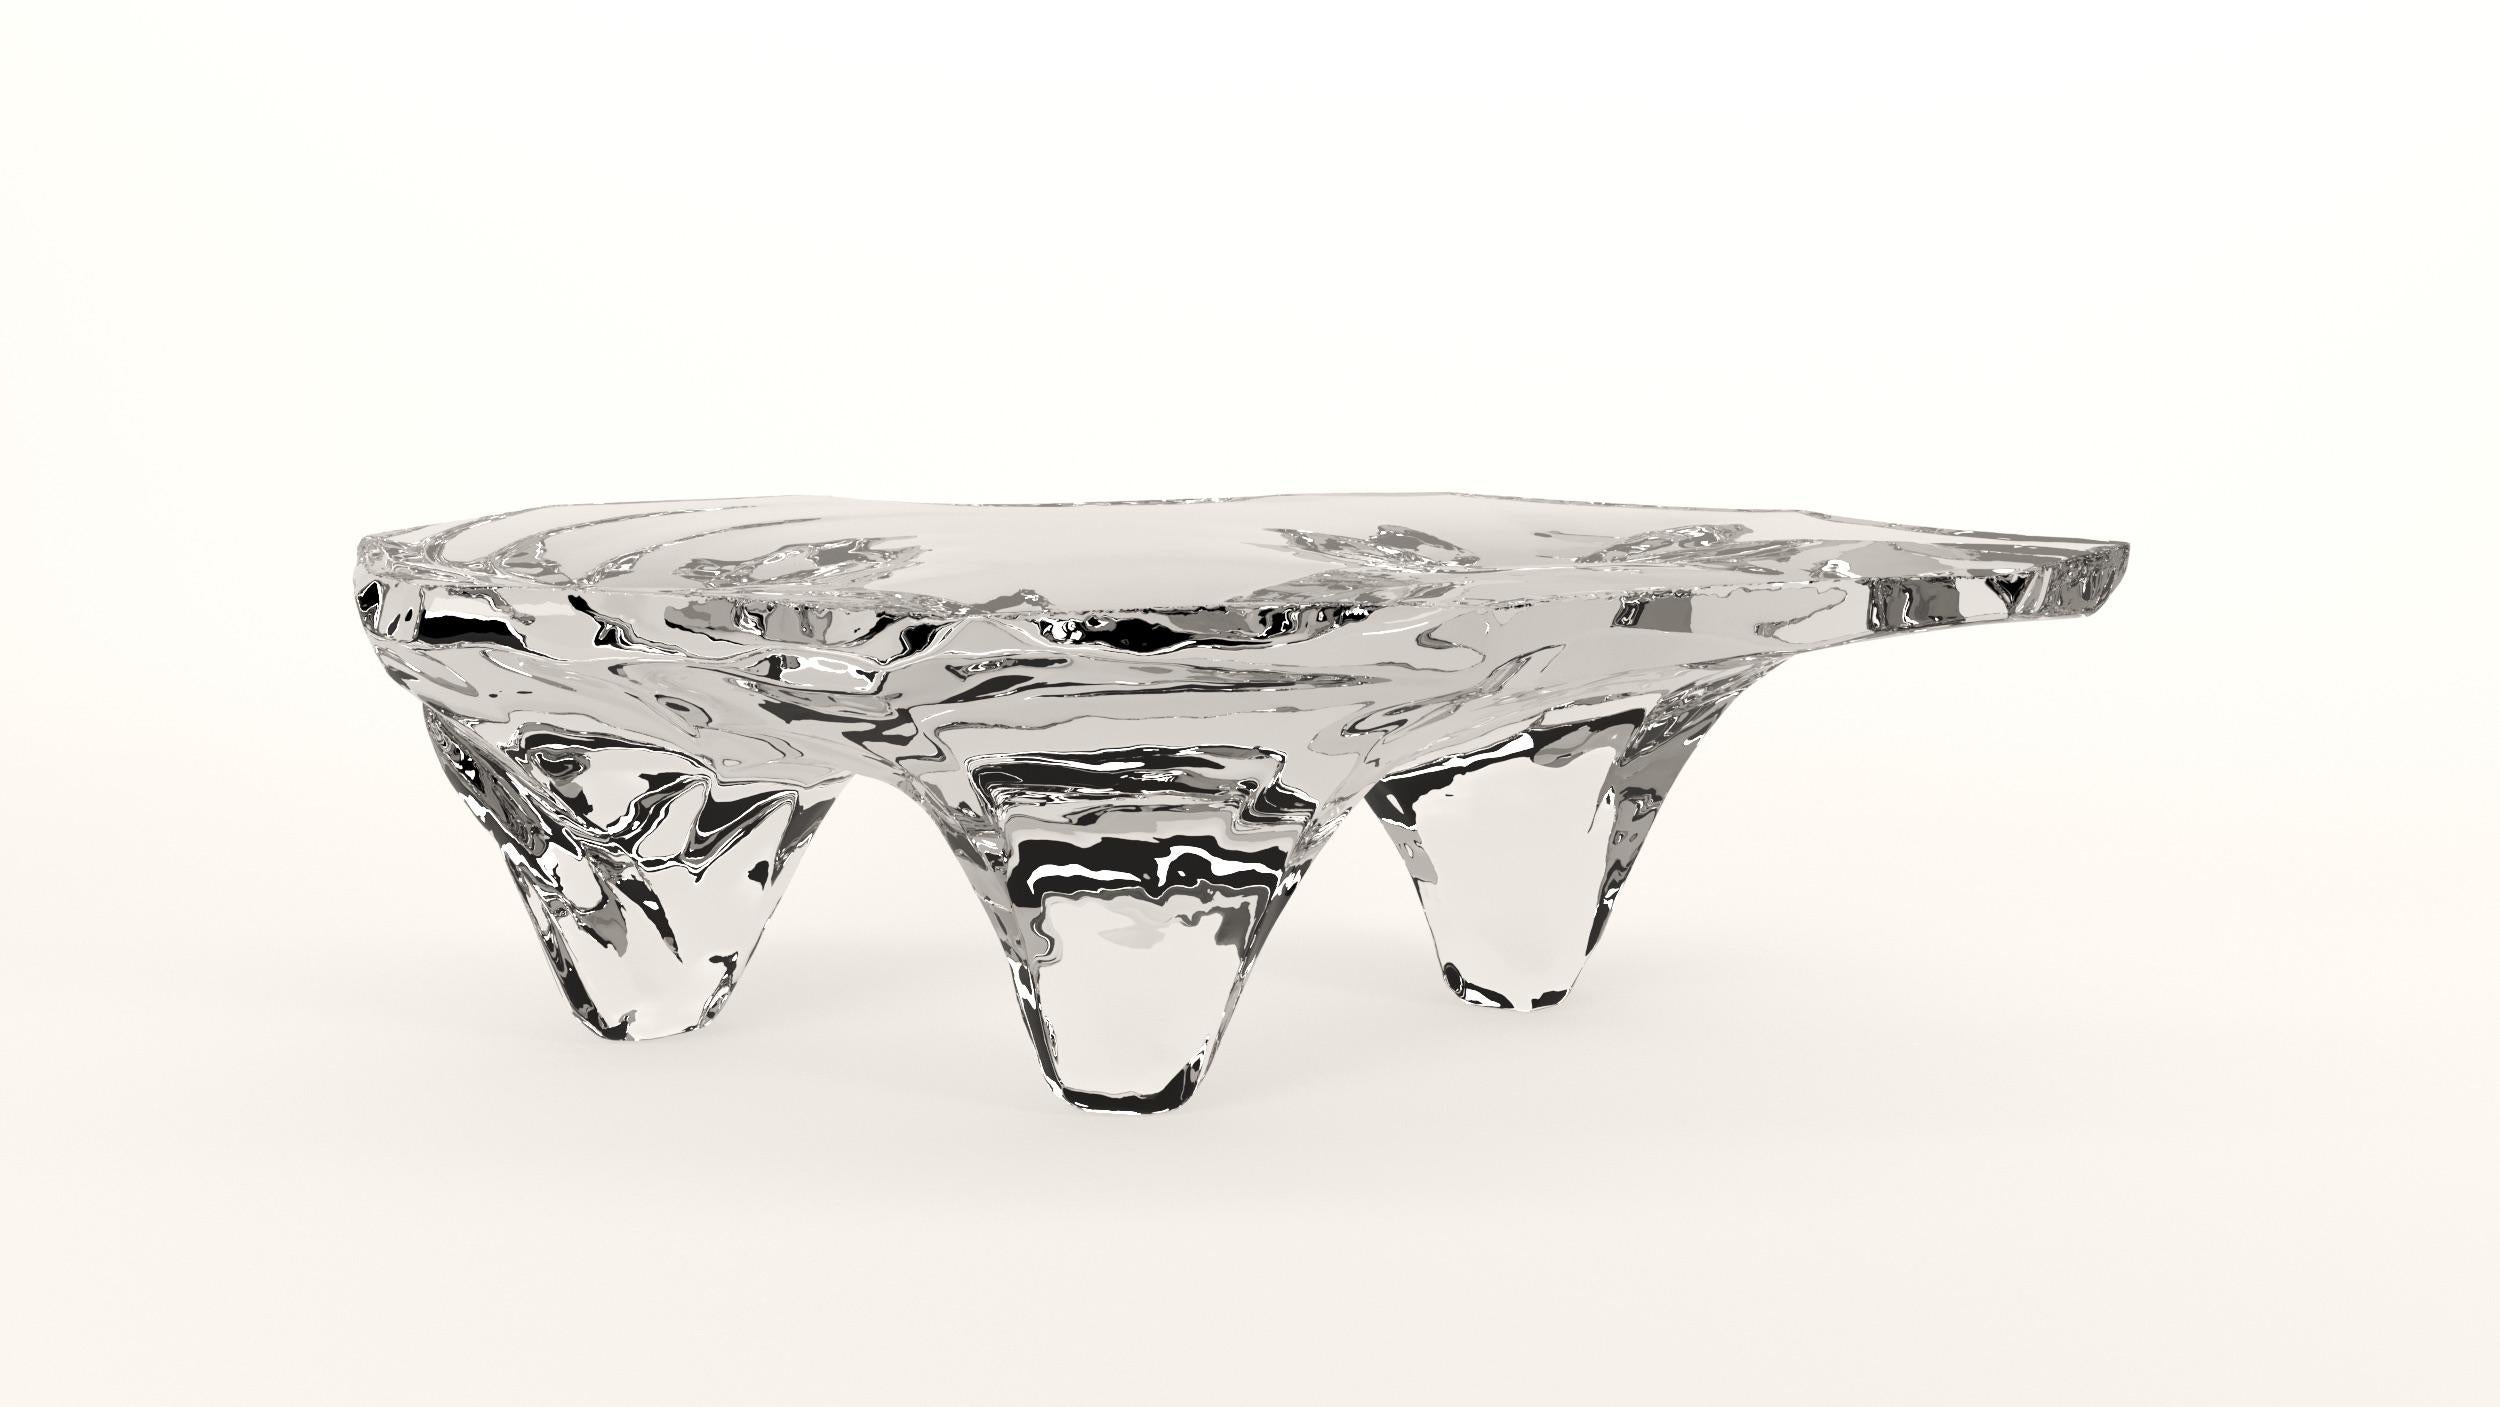 Coffee table Glacialis designed by Marco Pettinari for Superego Editions
This sculpture/coffee table made from a transparent Plexiglas block, it made by hand and with numerical control machinery.
Limited edition of 9 pieces.

Superego editions